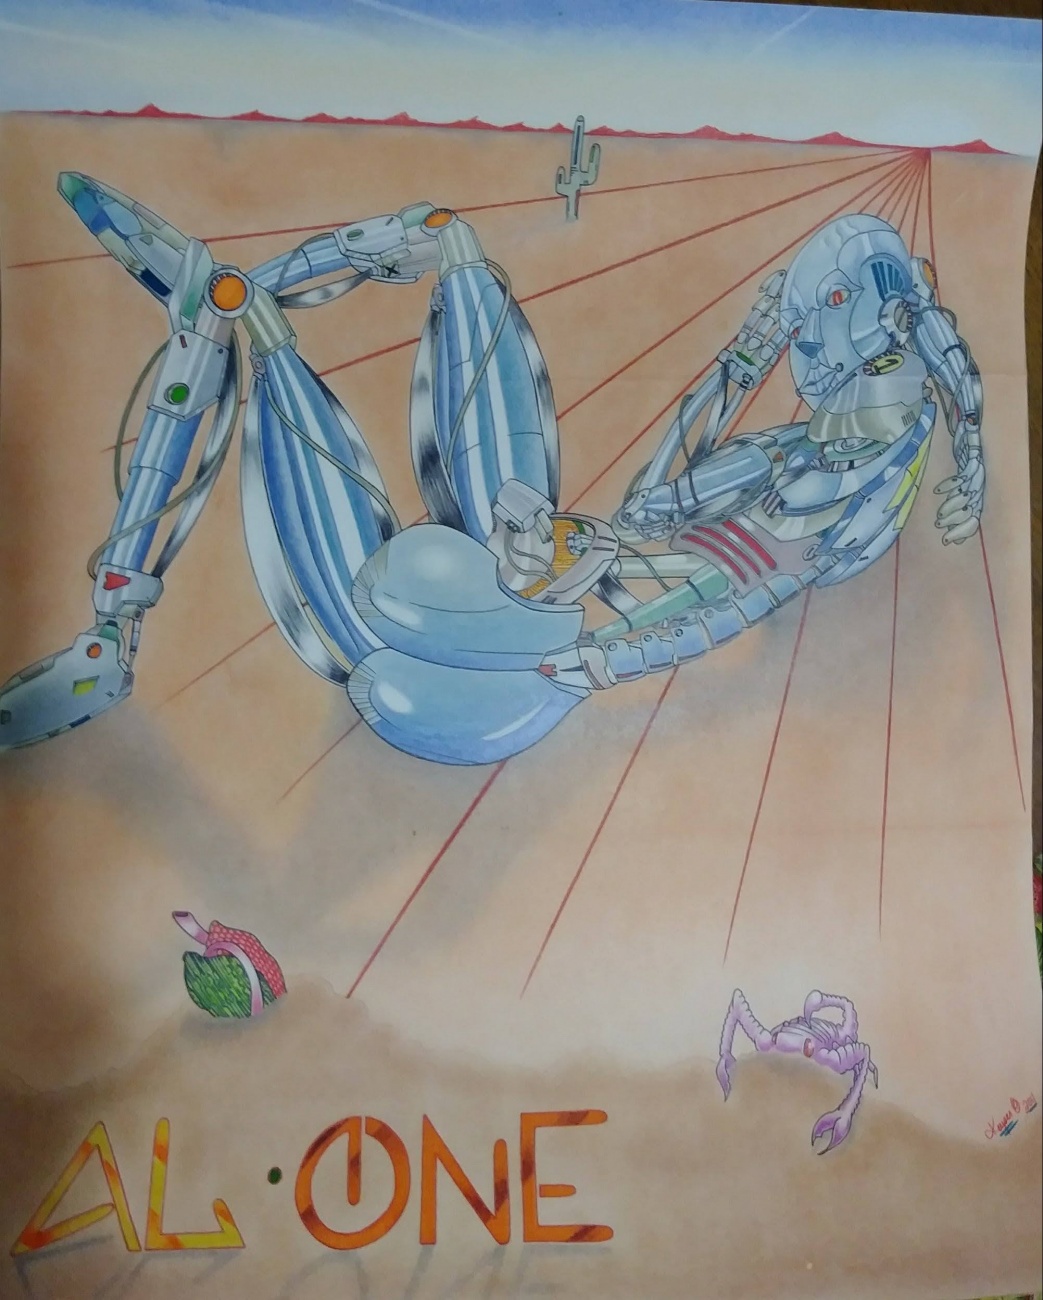 Al-One ( this is a portrayal of me, A...